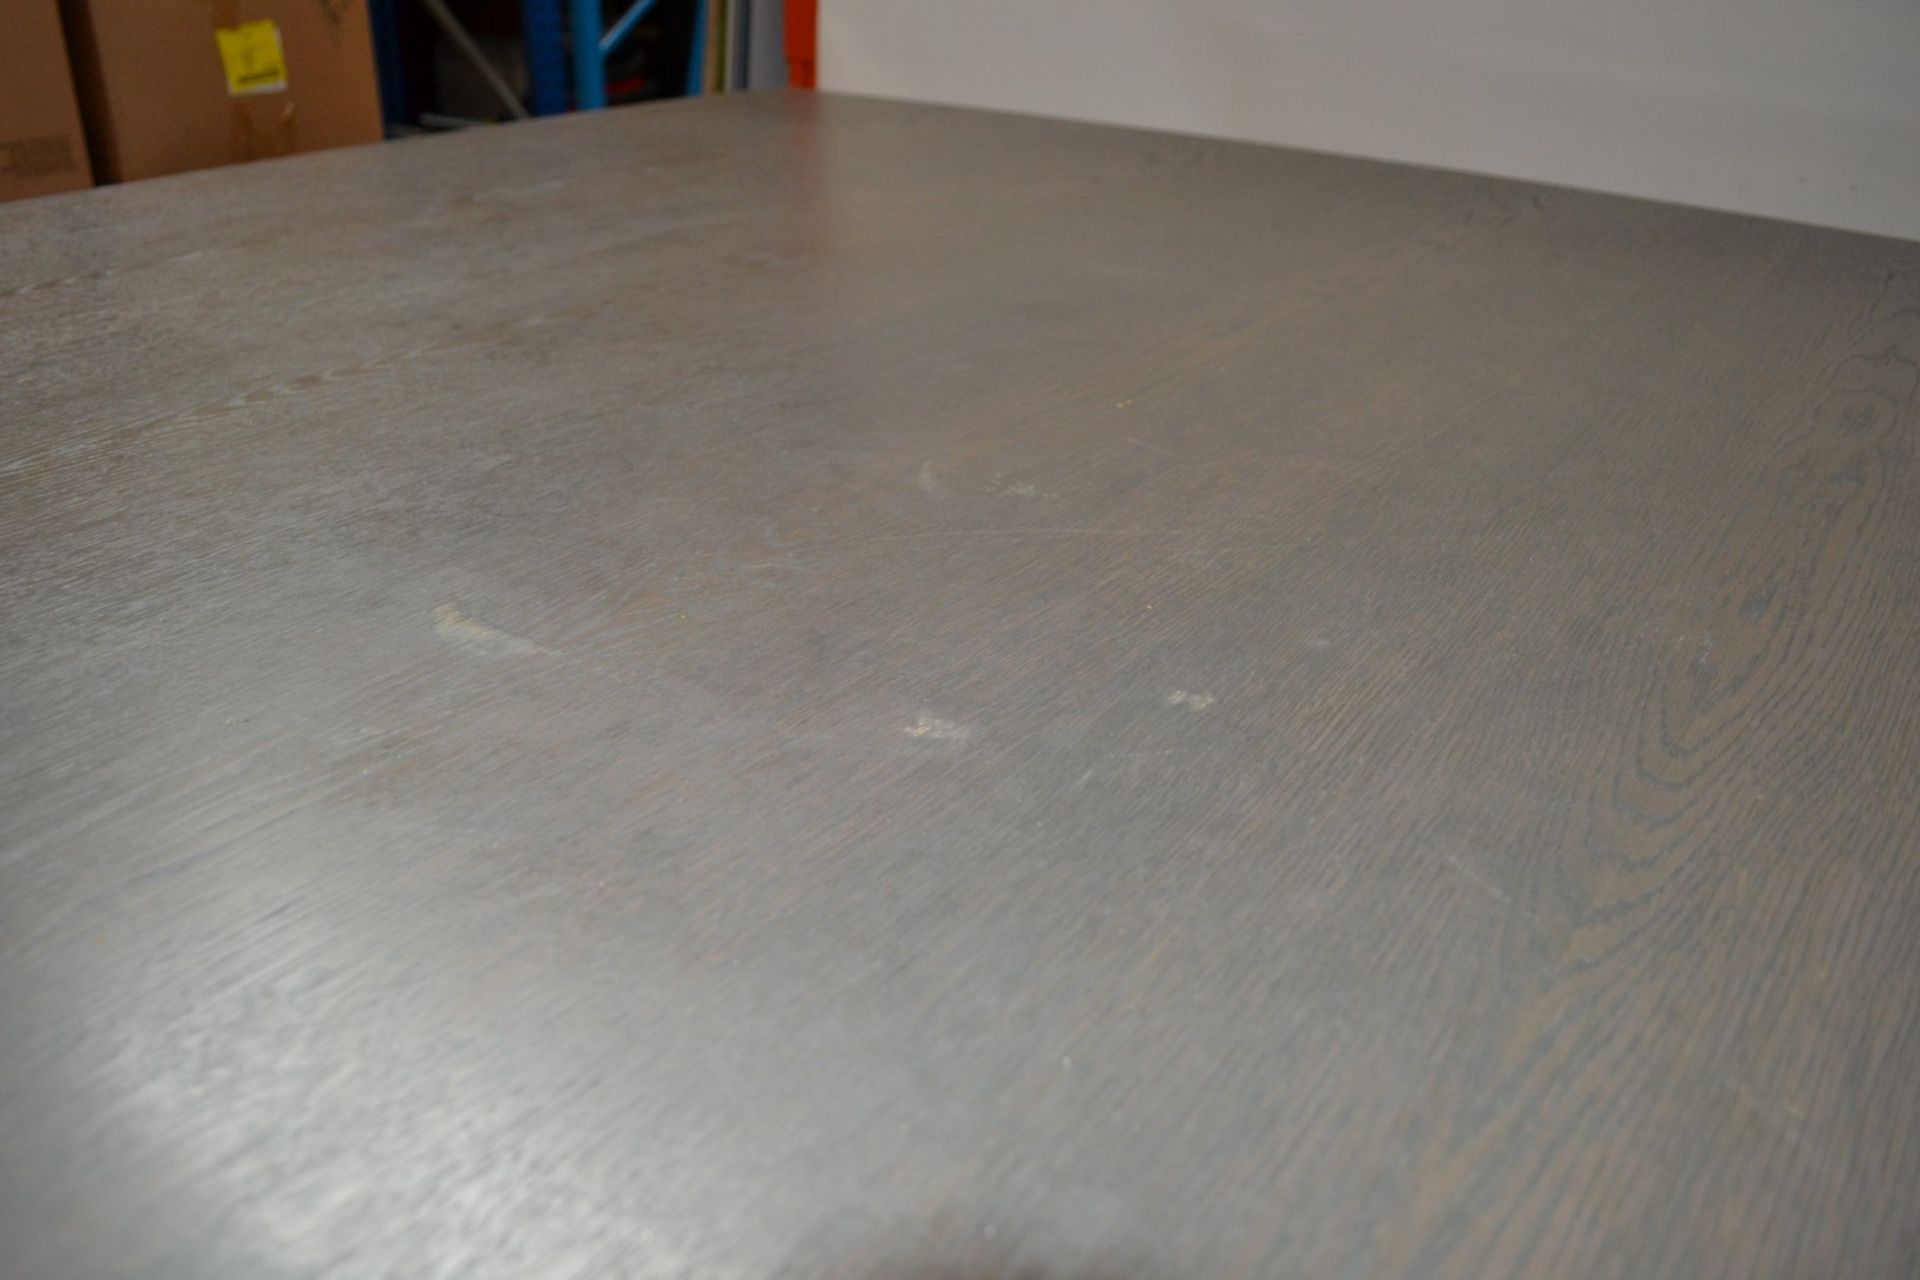 1 x Large Square Wooden Dining Table in a Grey Oak Coloured Finish - CL314 - Location: Altrincham - Image 7 of 10